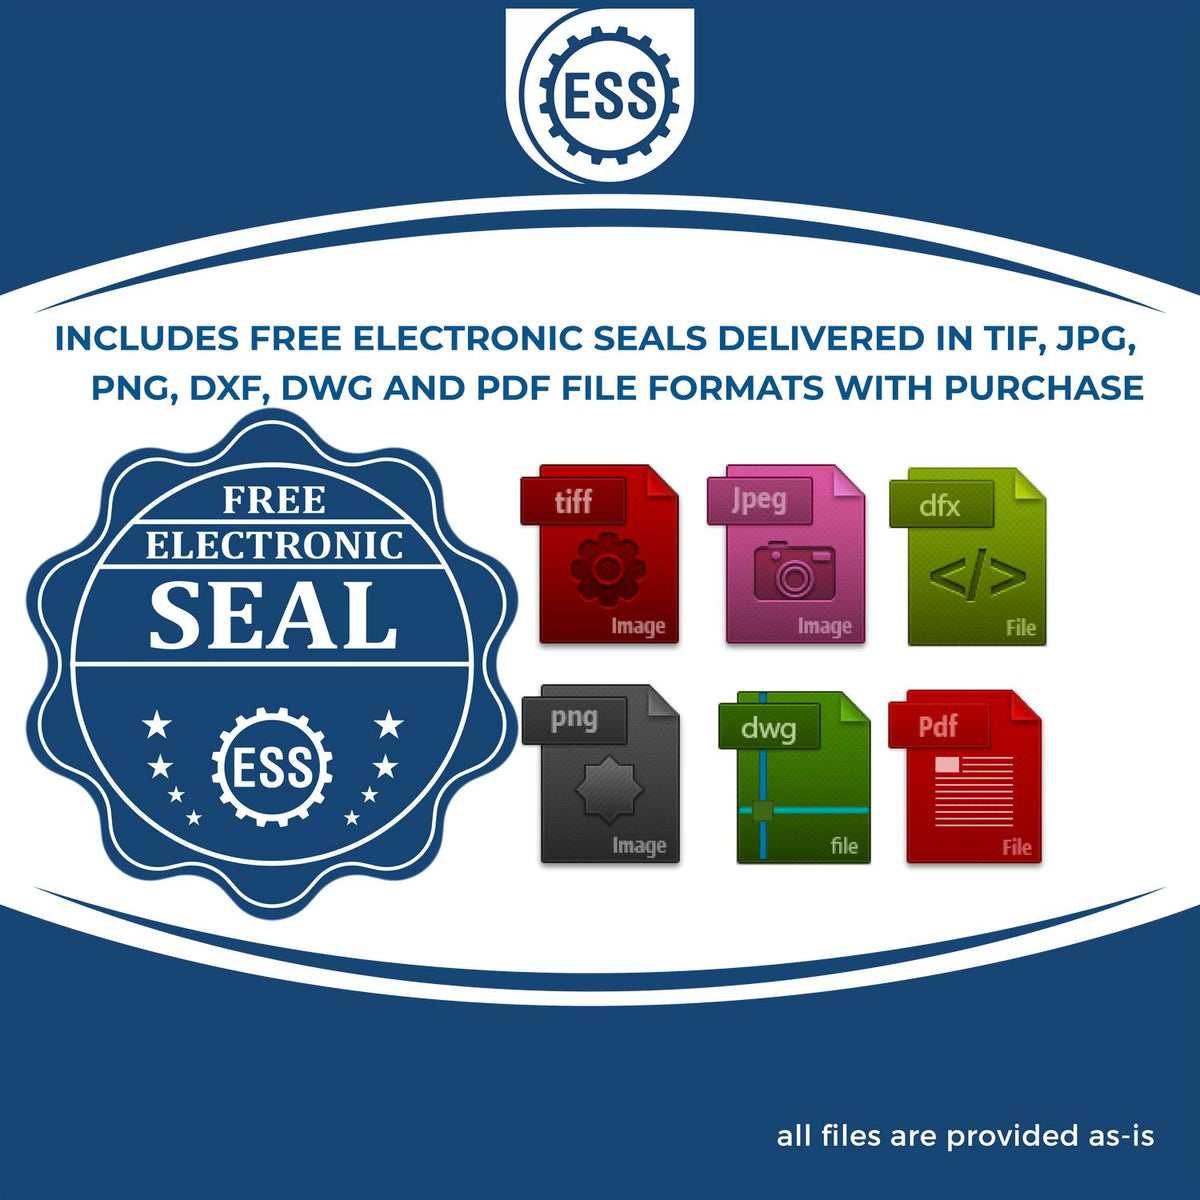 An infographic for the free electronic seal for the Extended Long Reach Rhode Island Architect Seal Embosser illustrating the different file type icons such as DXF, DWG, TIF, JPG and PNG.